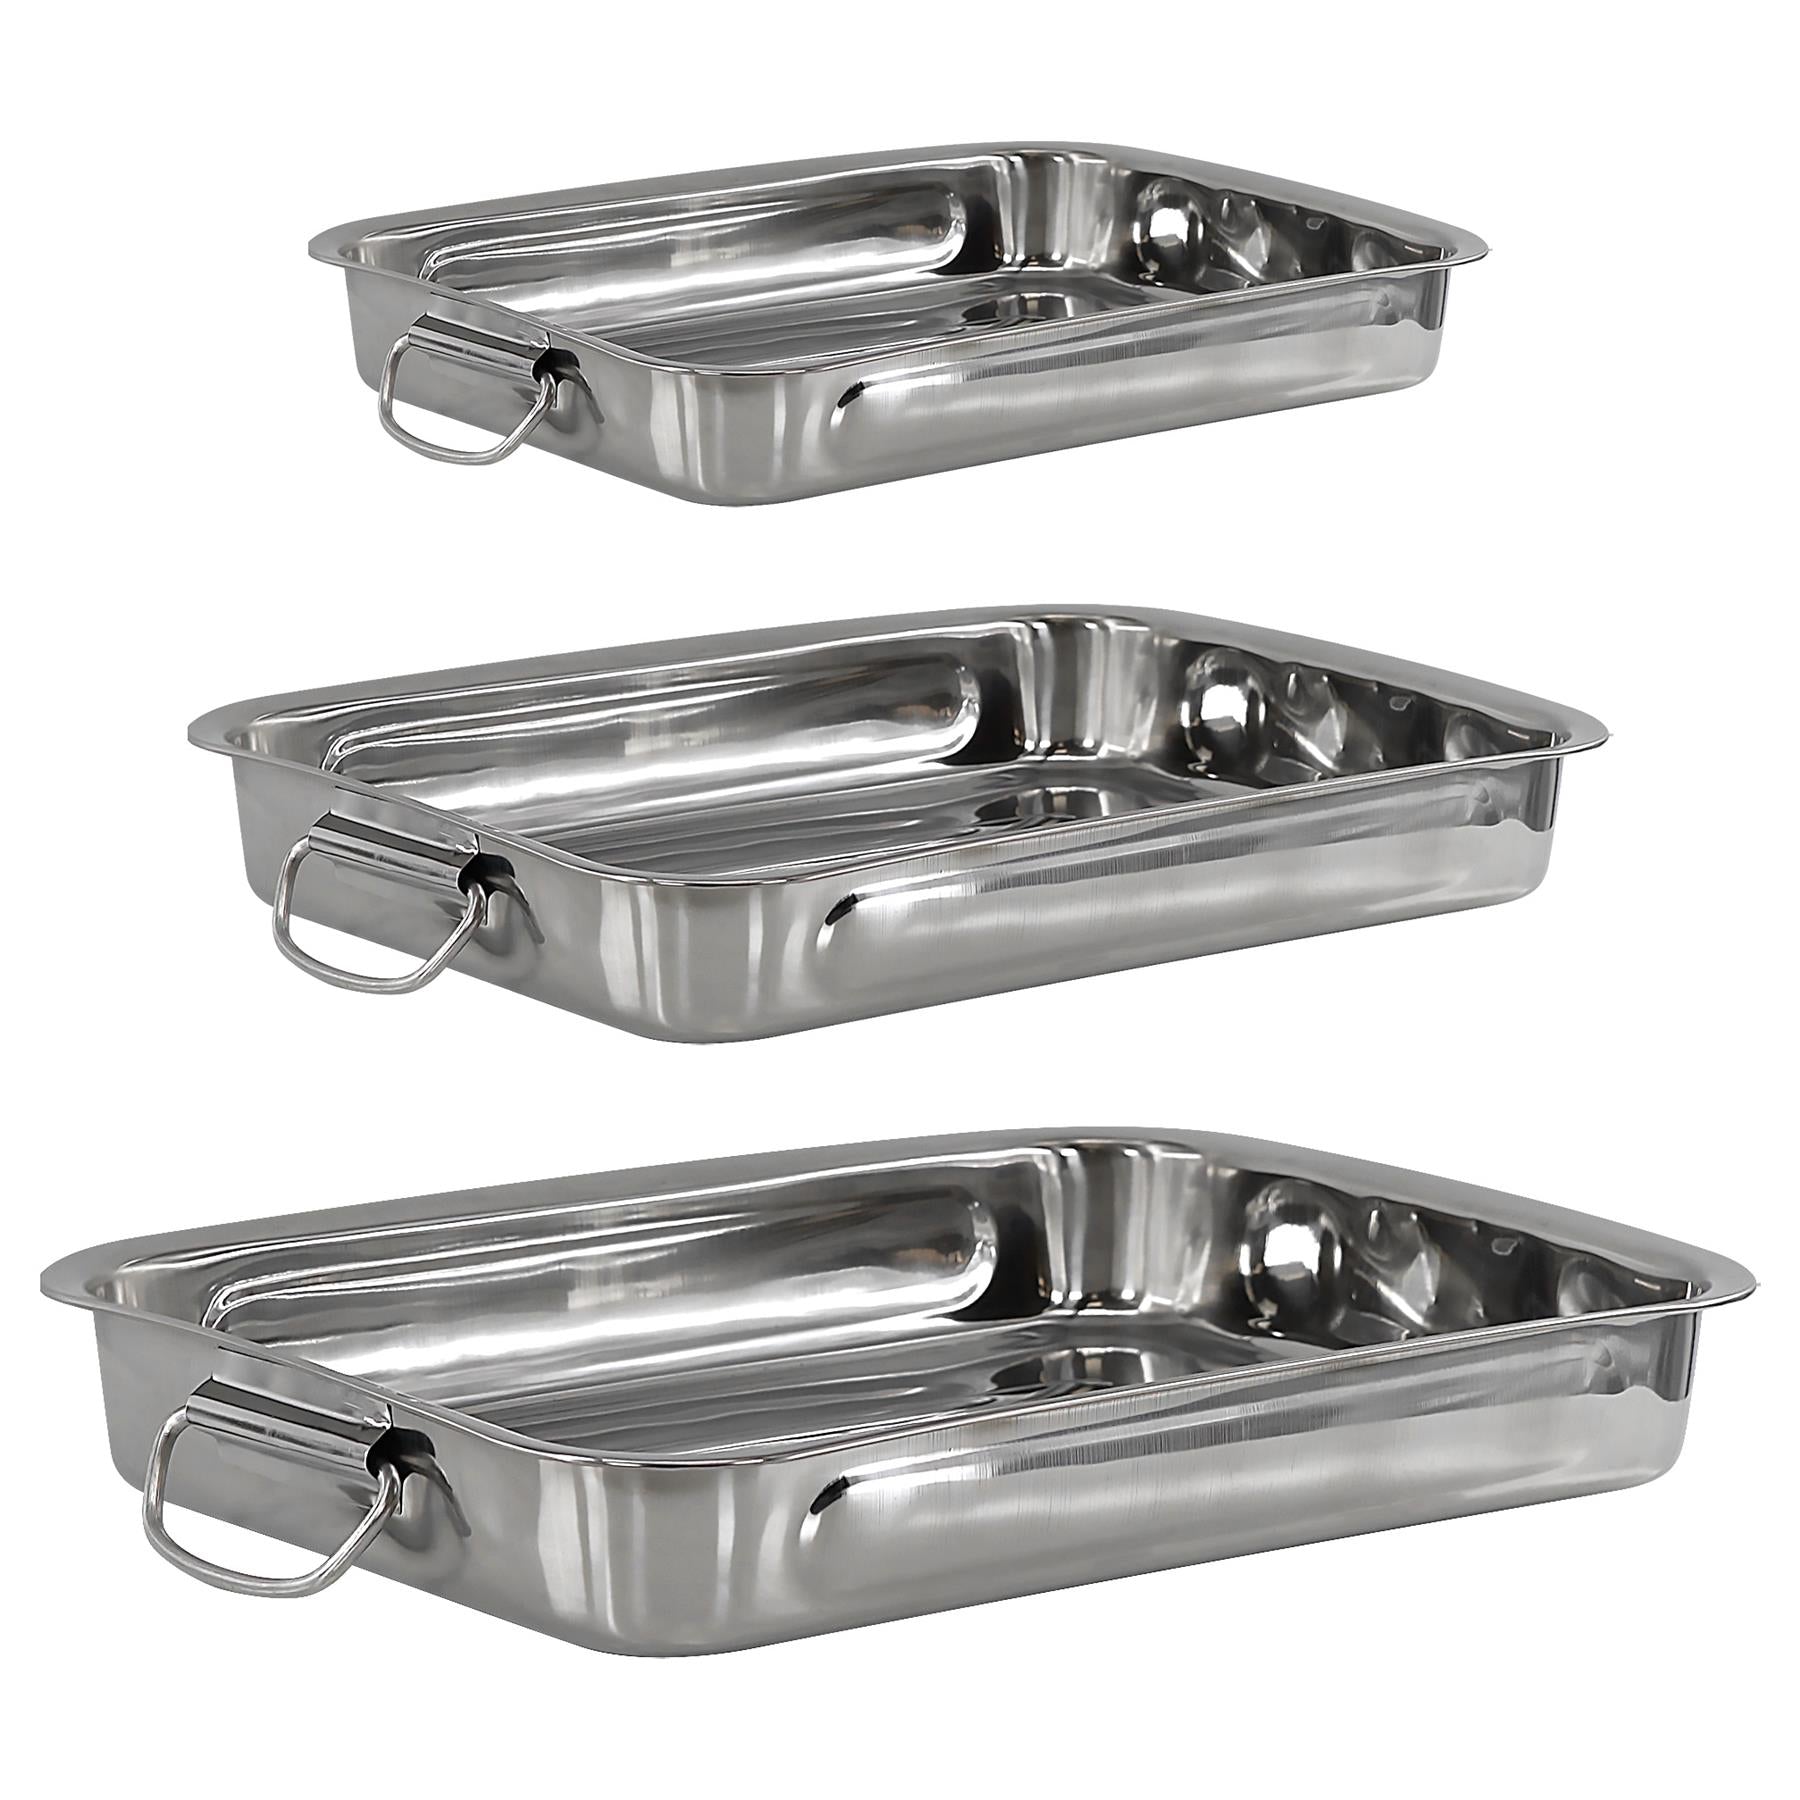 Set Of 3 Stainless Steel Roasting Trays by GEEZY - UKBuyZone